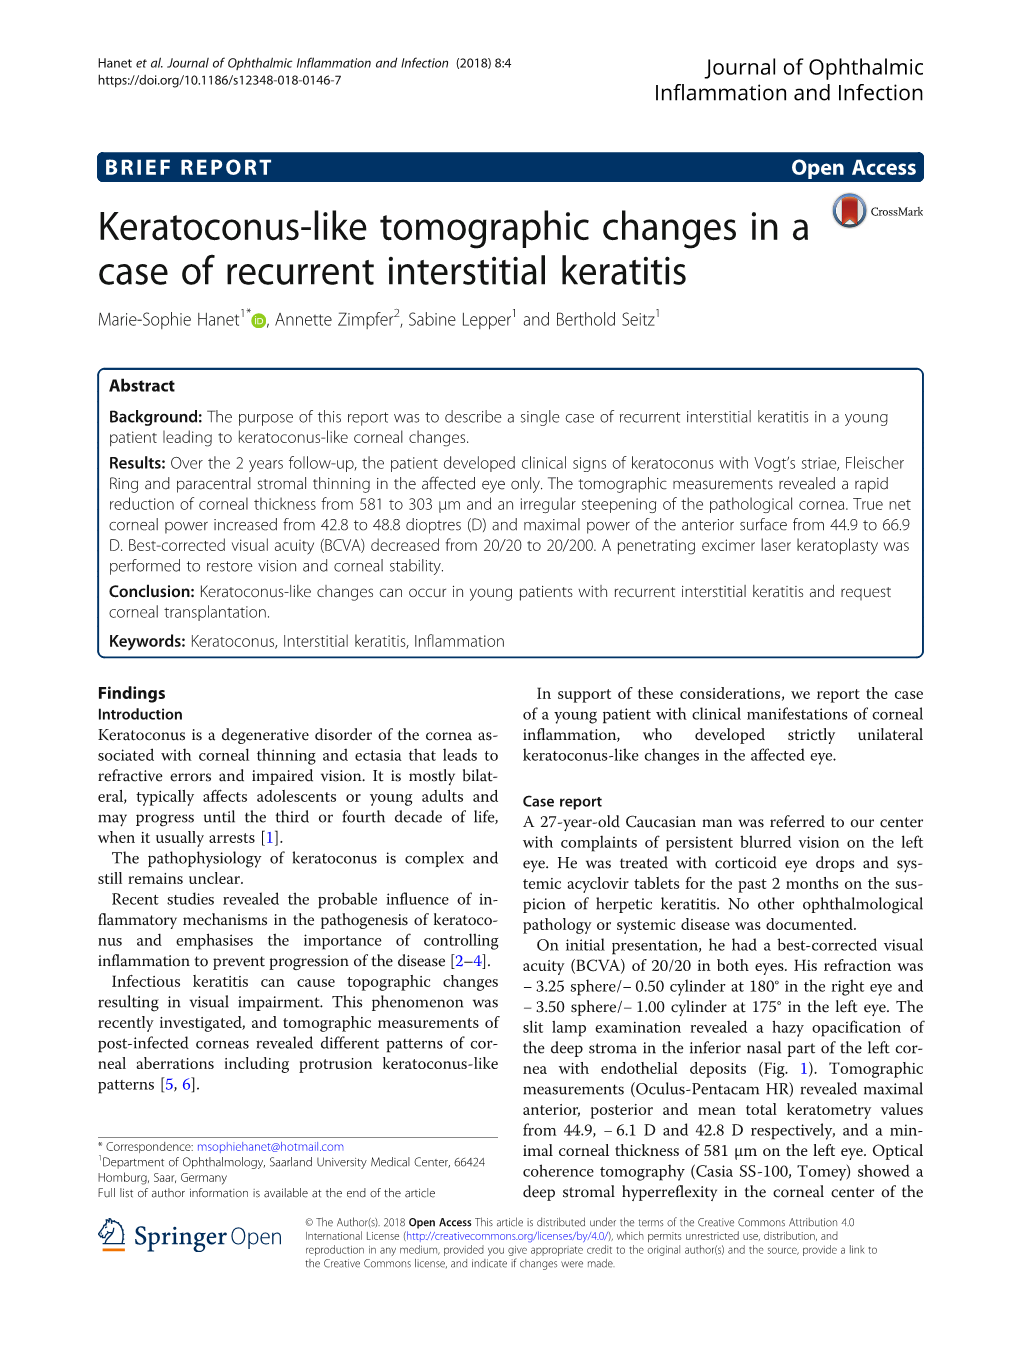 Keratoconus-Like Tomographic Changes in a Case of Recurrent Interstitial Keratitis Marie-Sophie Hanet1* , Annette Zimpfer2, Sabine Lepper1 and Berthold Seitz1